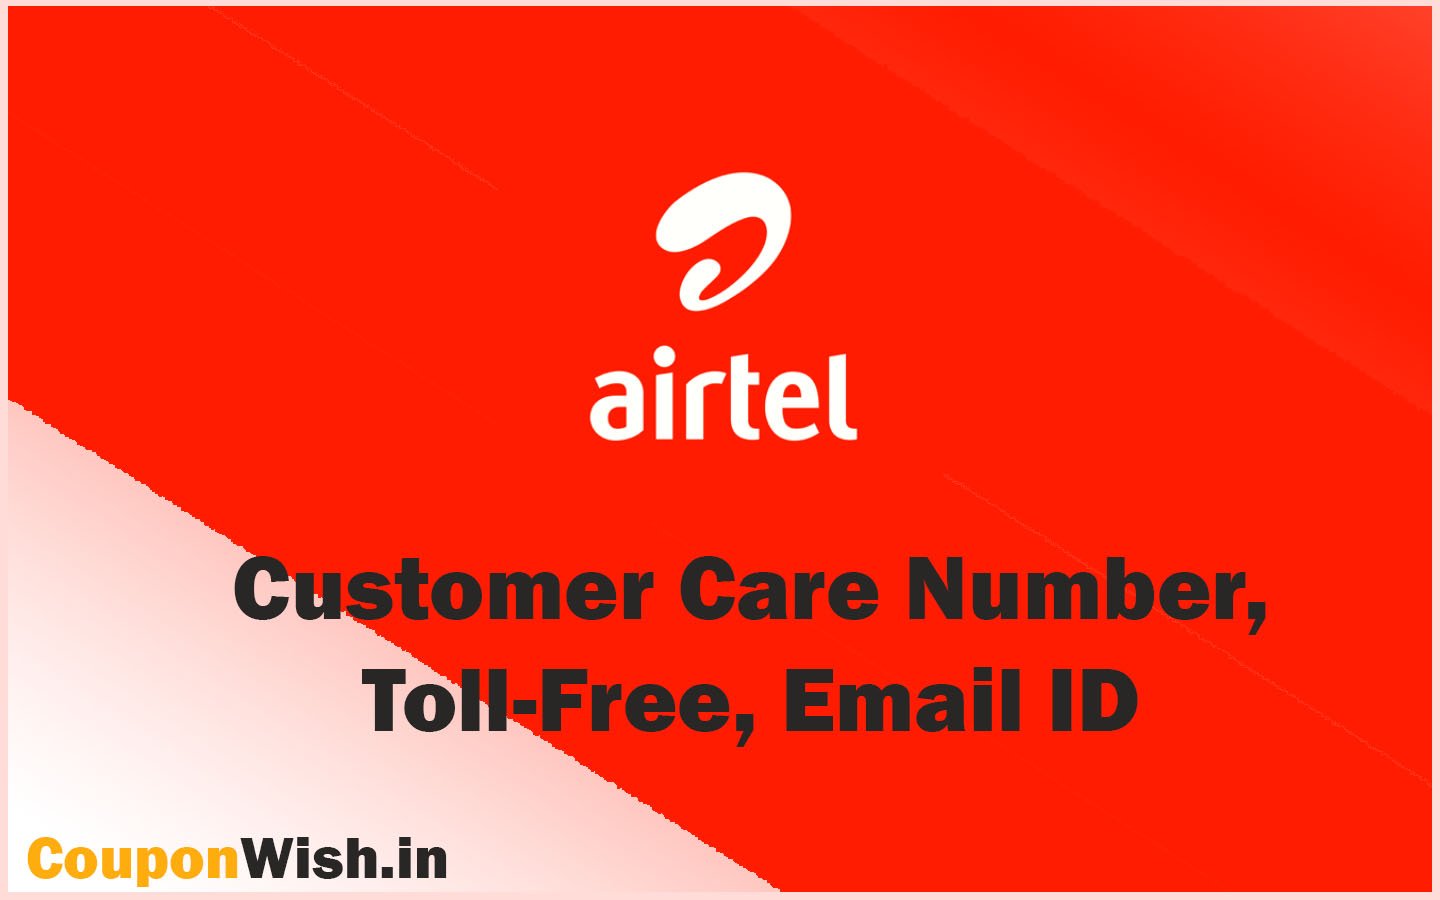 Airtel Customer Care Number, Toll-Free, Email ID